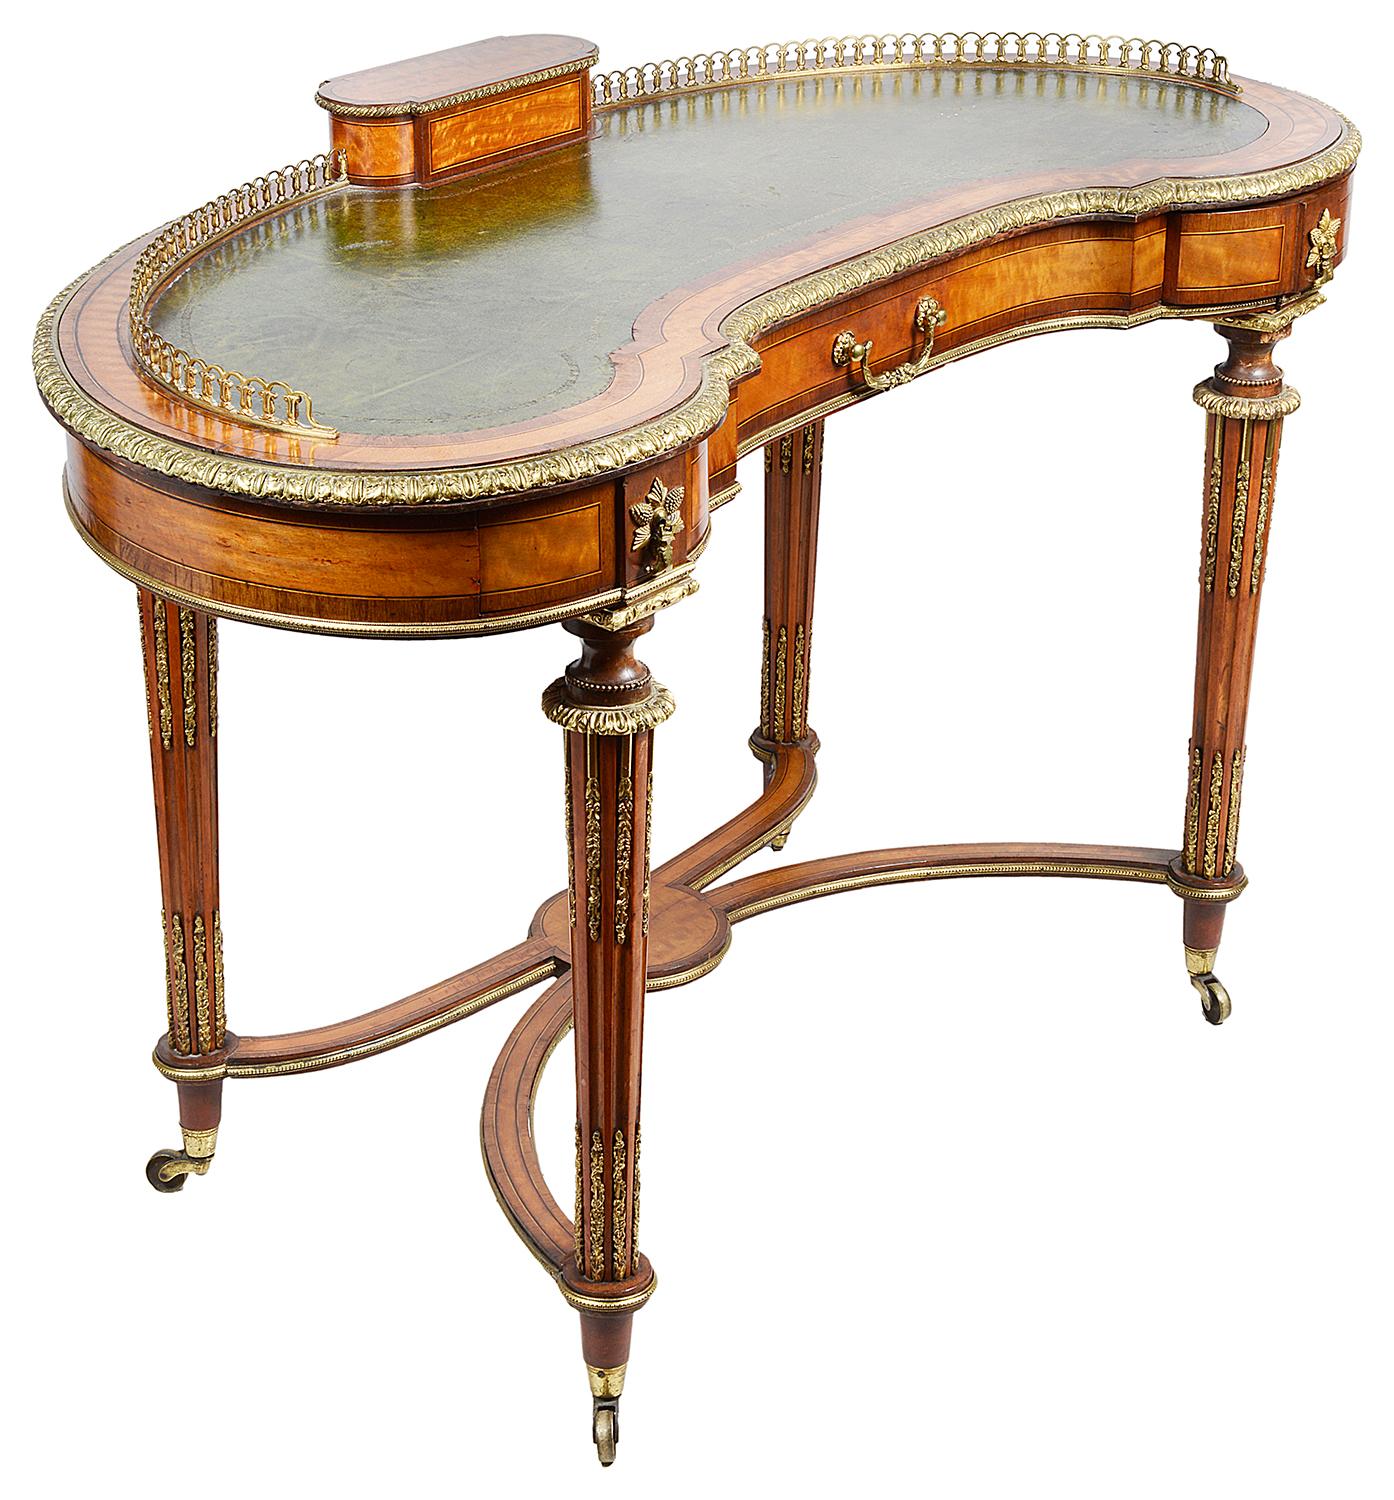 A very good quality Victorian period satinwood kidney shaped ladies writing table, having scalloped gilded ormolu three quarter gallery, a hinged pen tray and letter rack to the centre, an inset leather top, three mahogany lined frieze drawers,